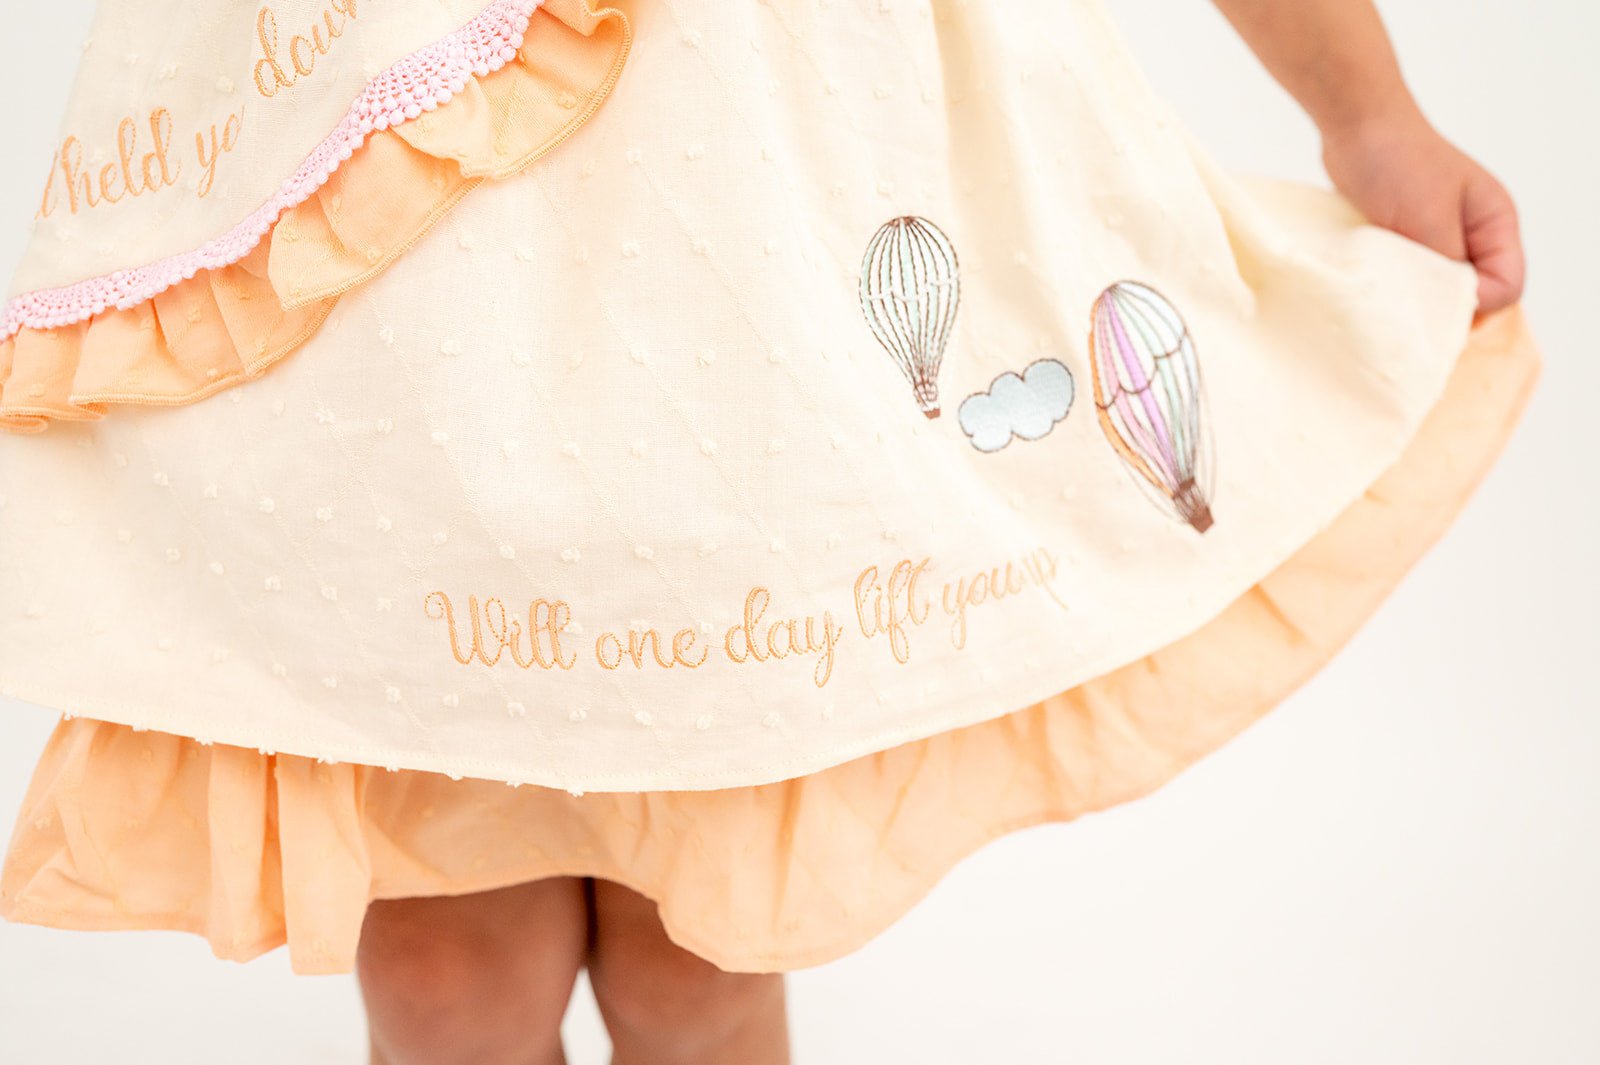 Come Fly With Me Ivory and Soft Peach Embroidered Swiss Dot Woven Dress - Evie's Closet Clothing